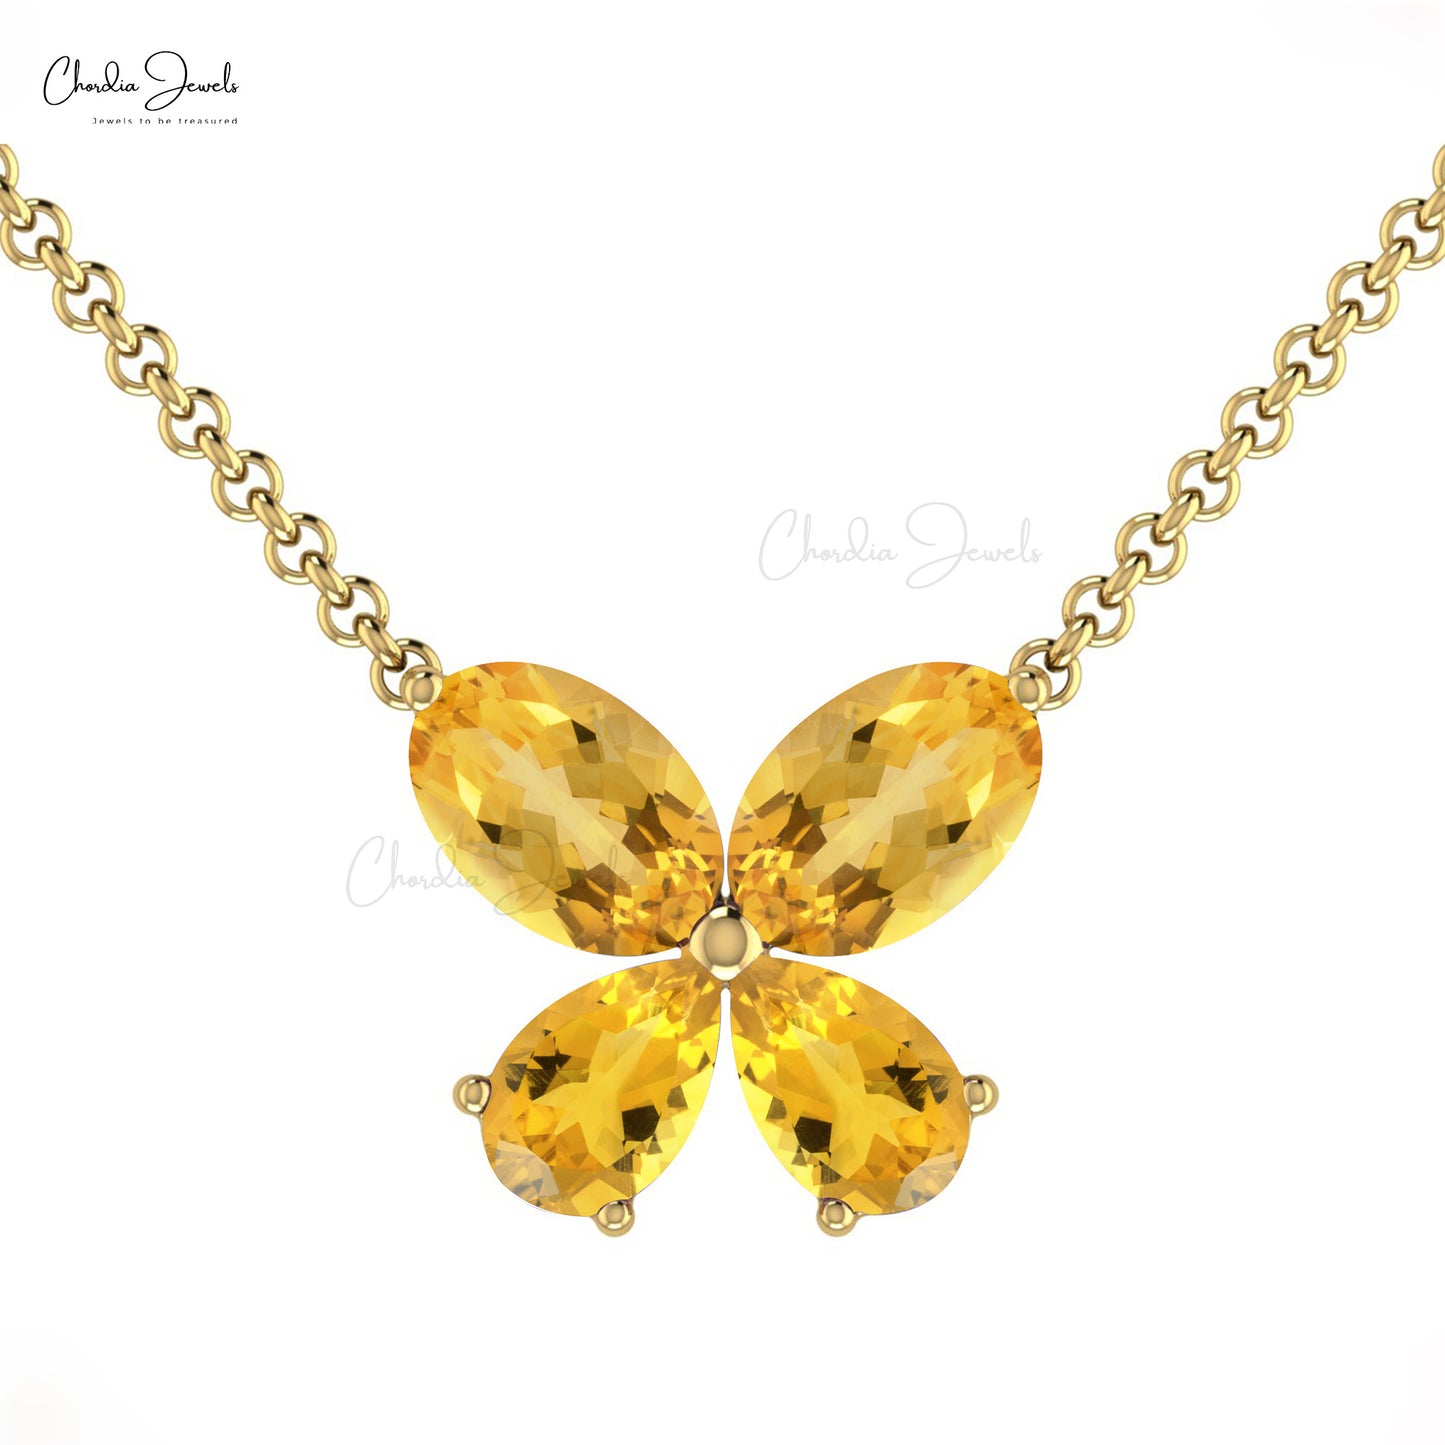 Authentic Citrine Butterfly Necklace